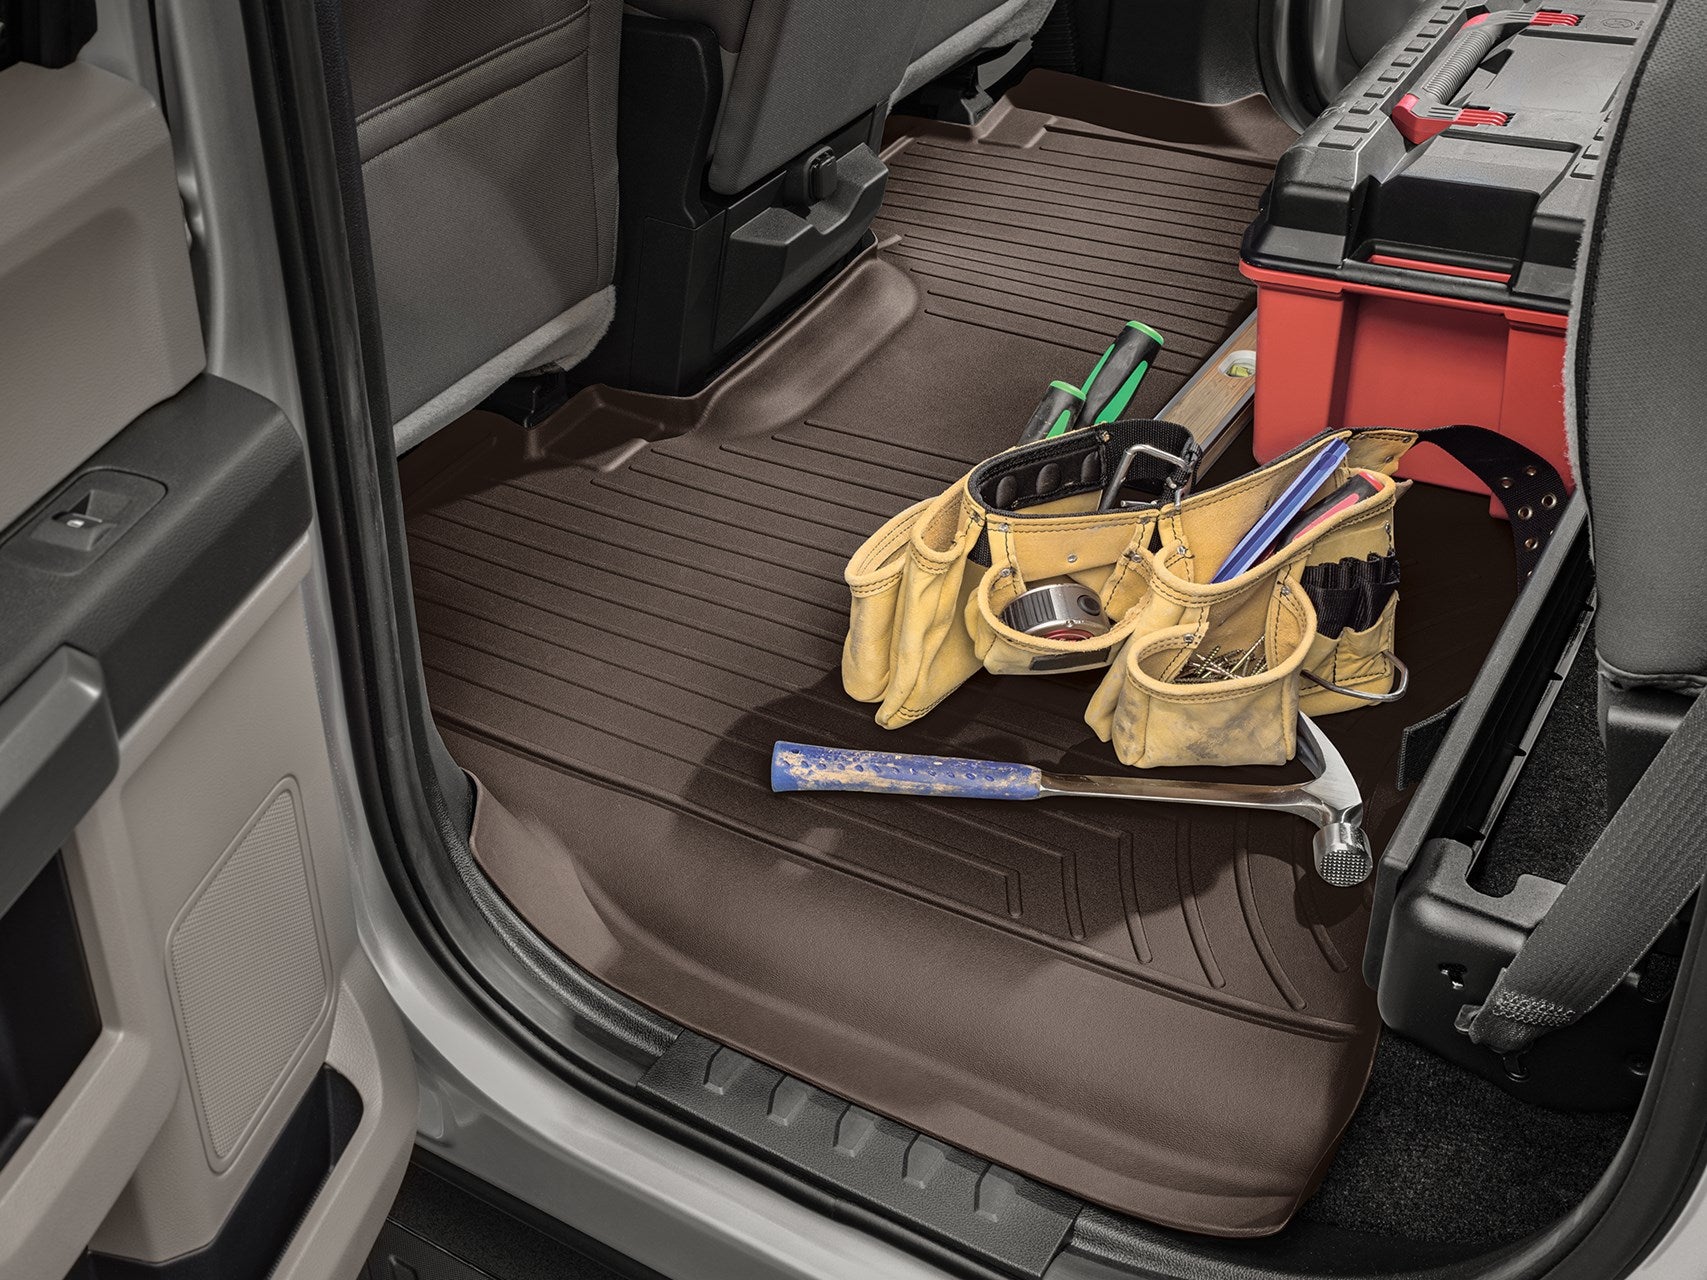 FloorLiner - Unmatched Protection for Your Vehicle's Floors